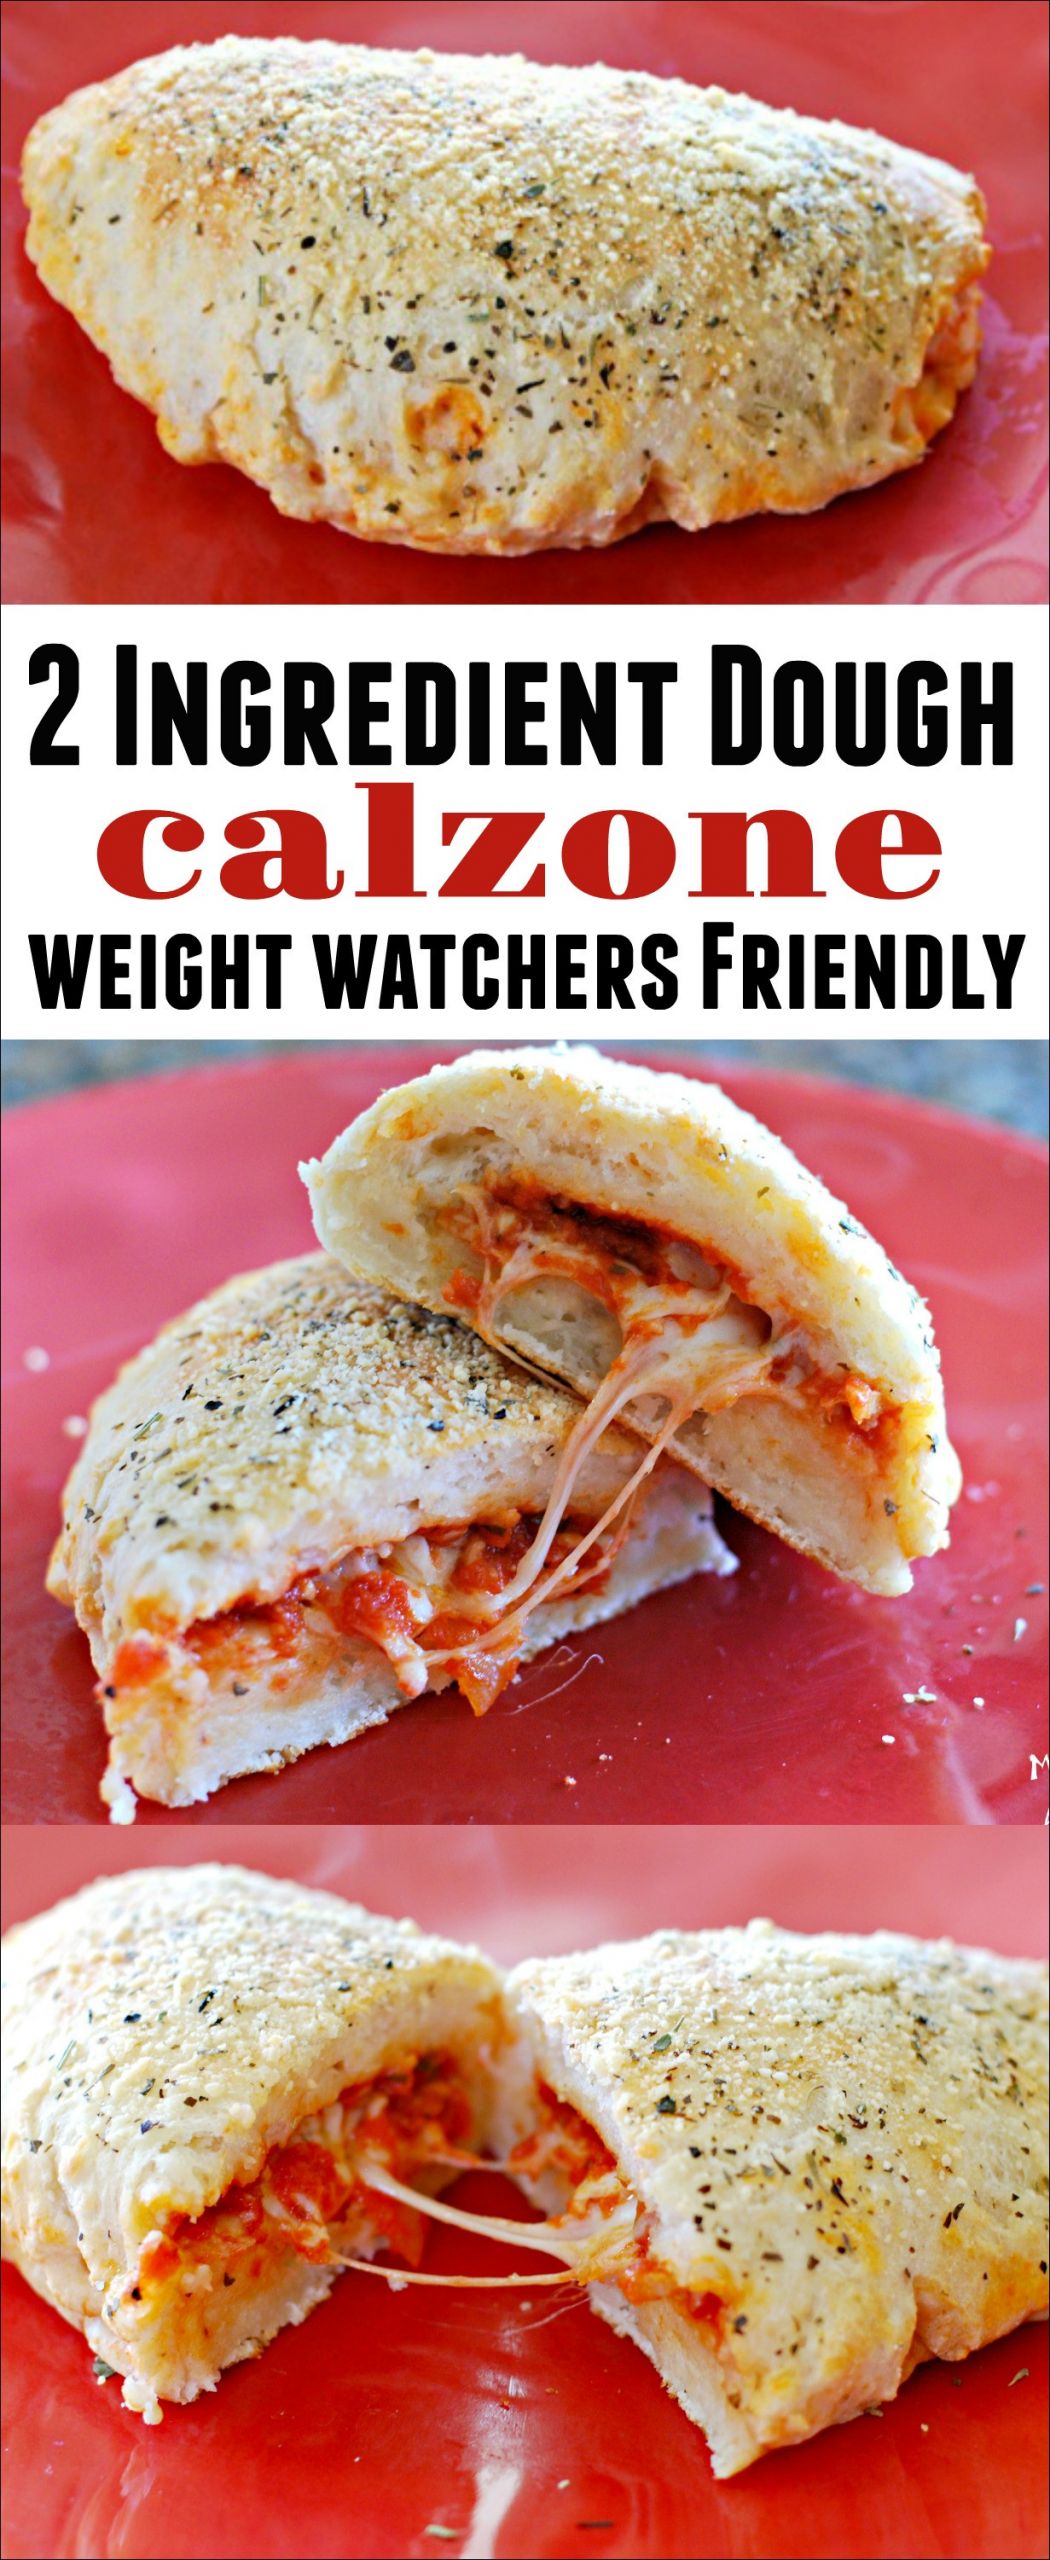 Calzone Recipe With Premade Pizza Dough
 2 Ingre nt Dough Calzone Mess for Less